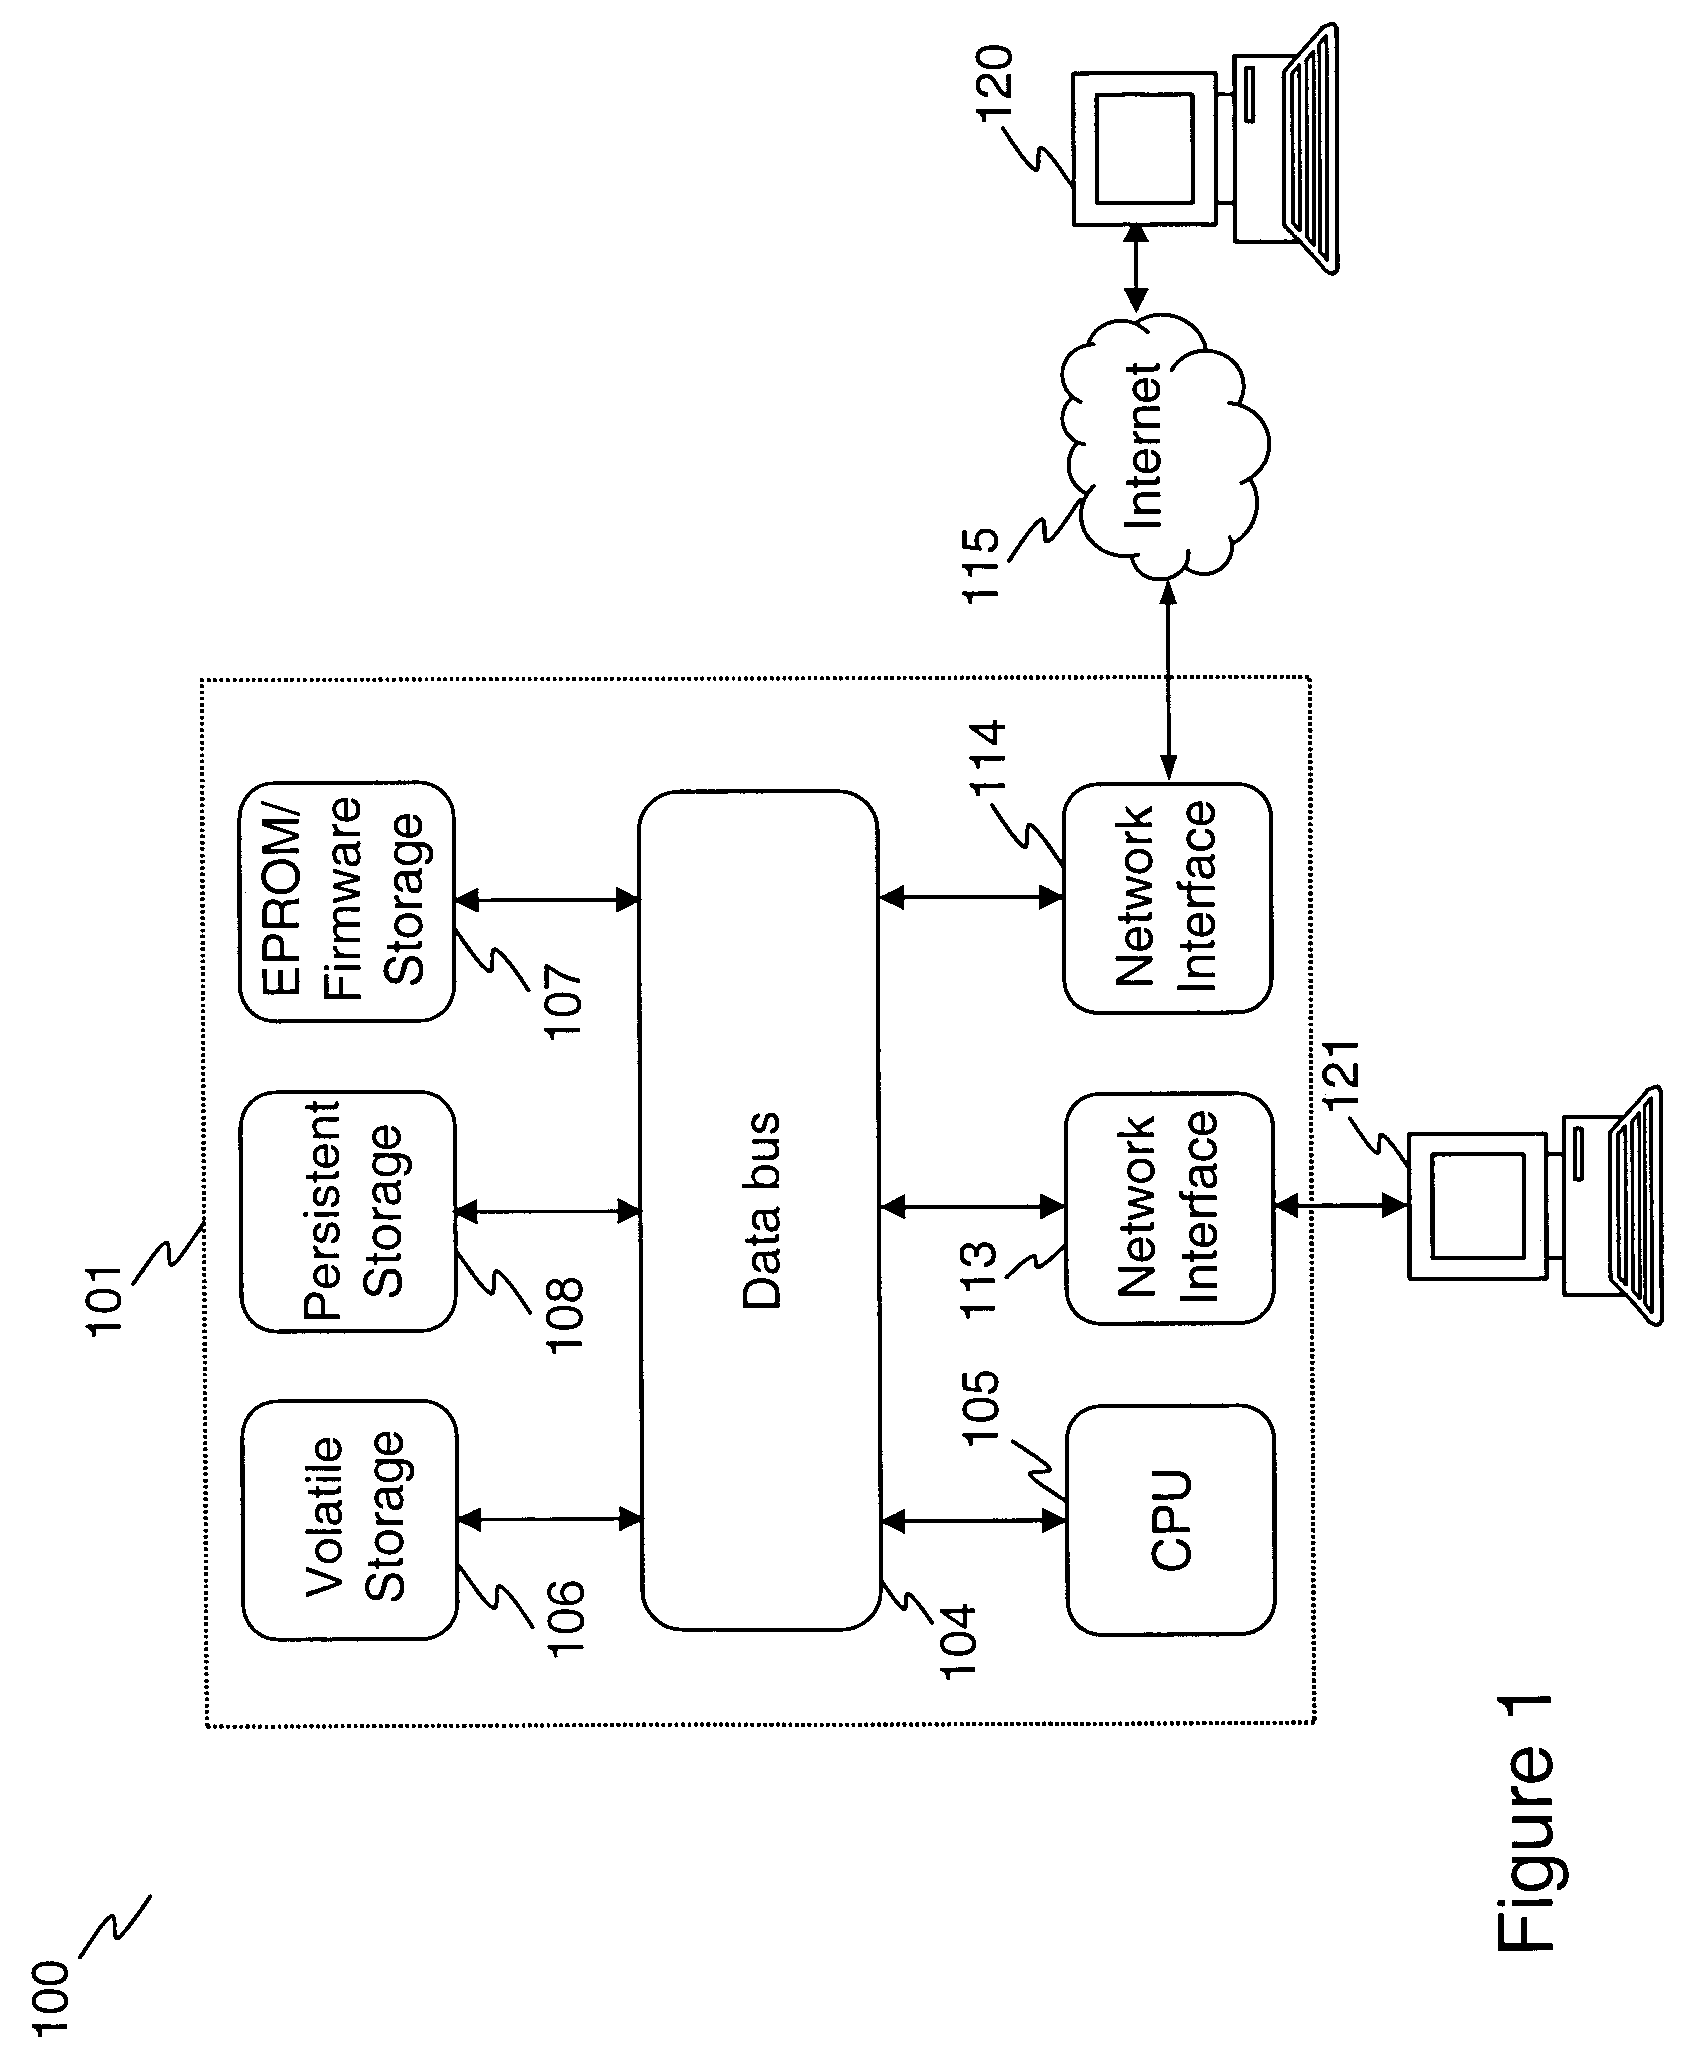 Apparatus and method for analyzing and filtering email and for providing web related services